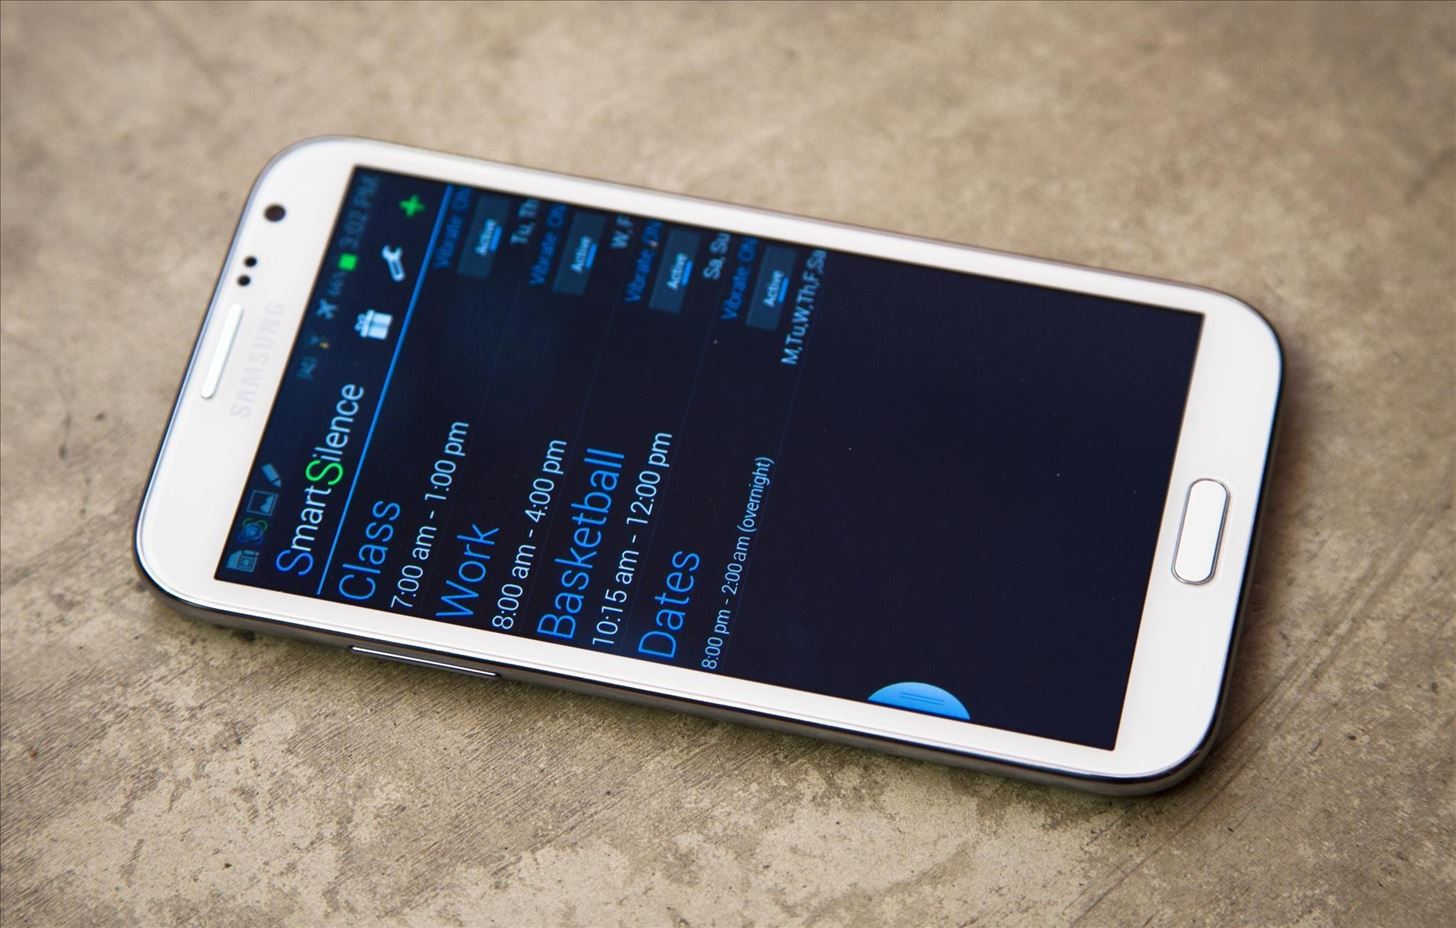 How to Schedule Ringtone Silence for Weekly or One-Time Events on Your Samsung Galaxy Note 2